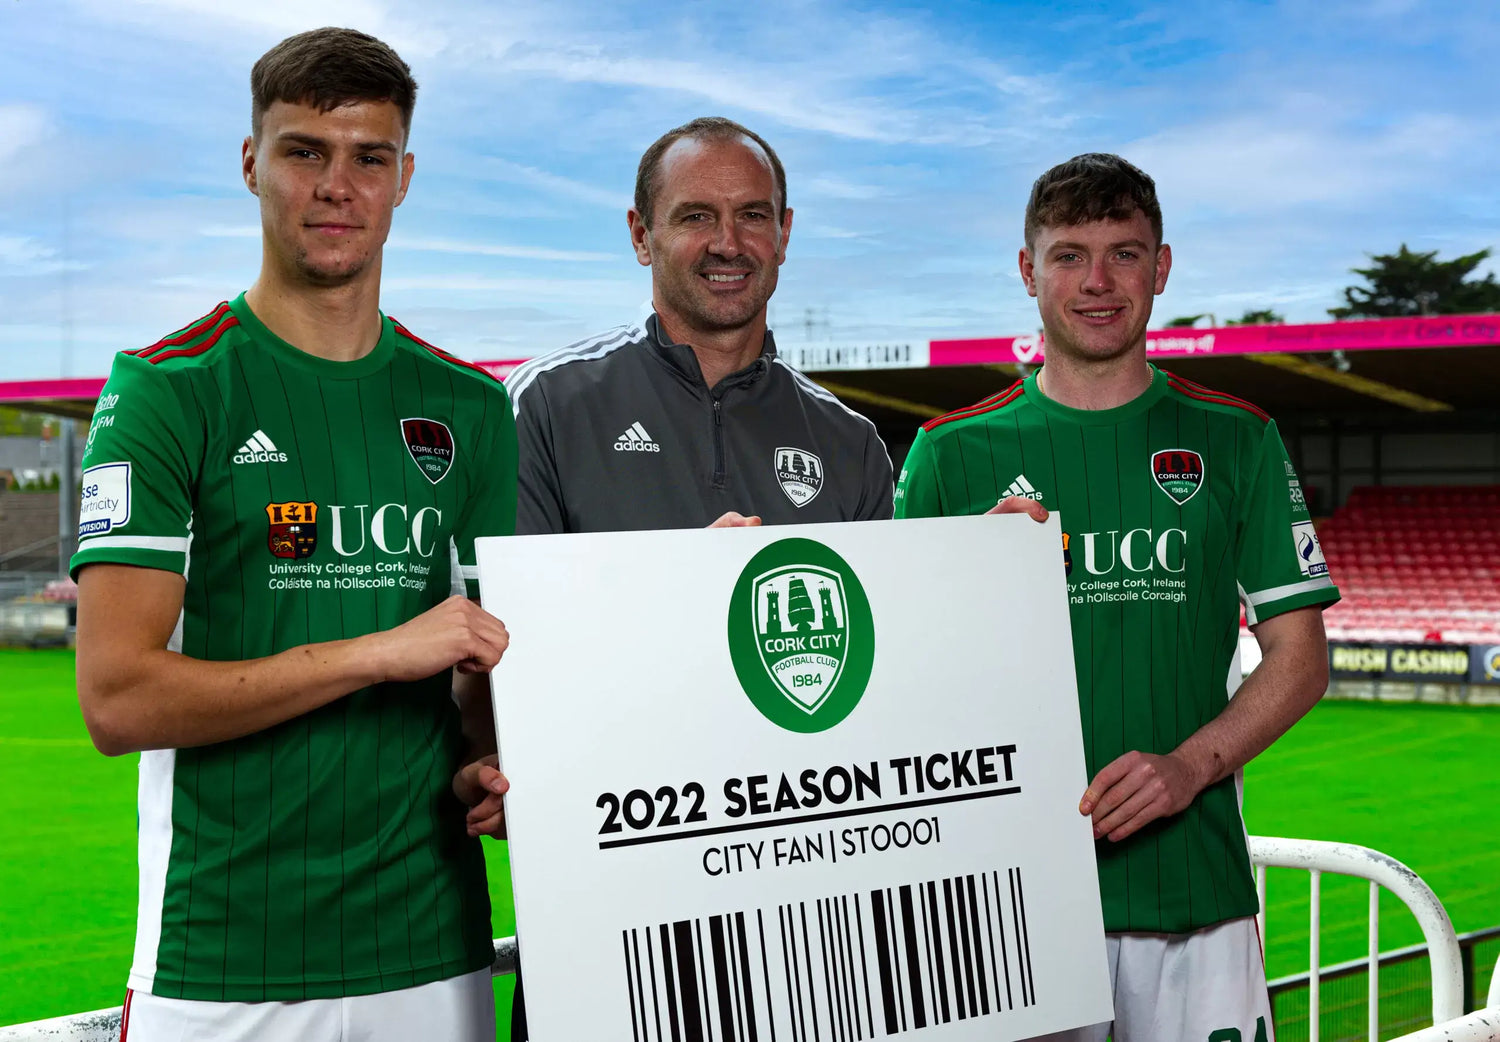 2022 Season Tickets - Available Now!